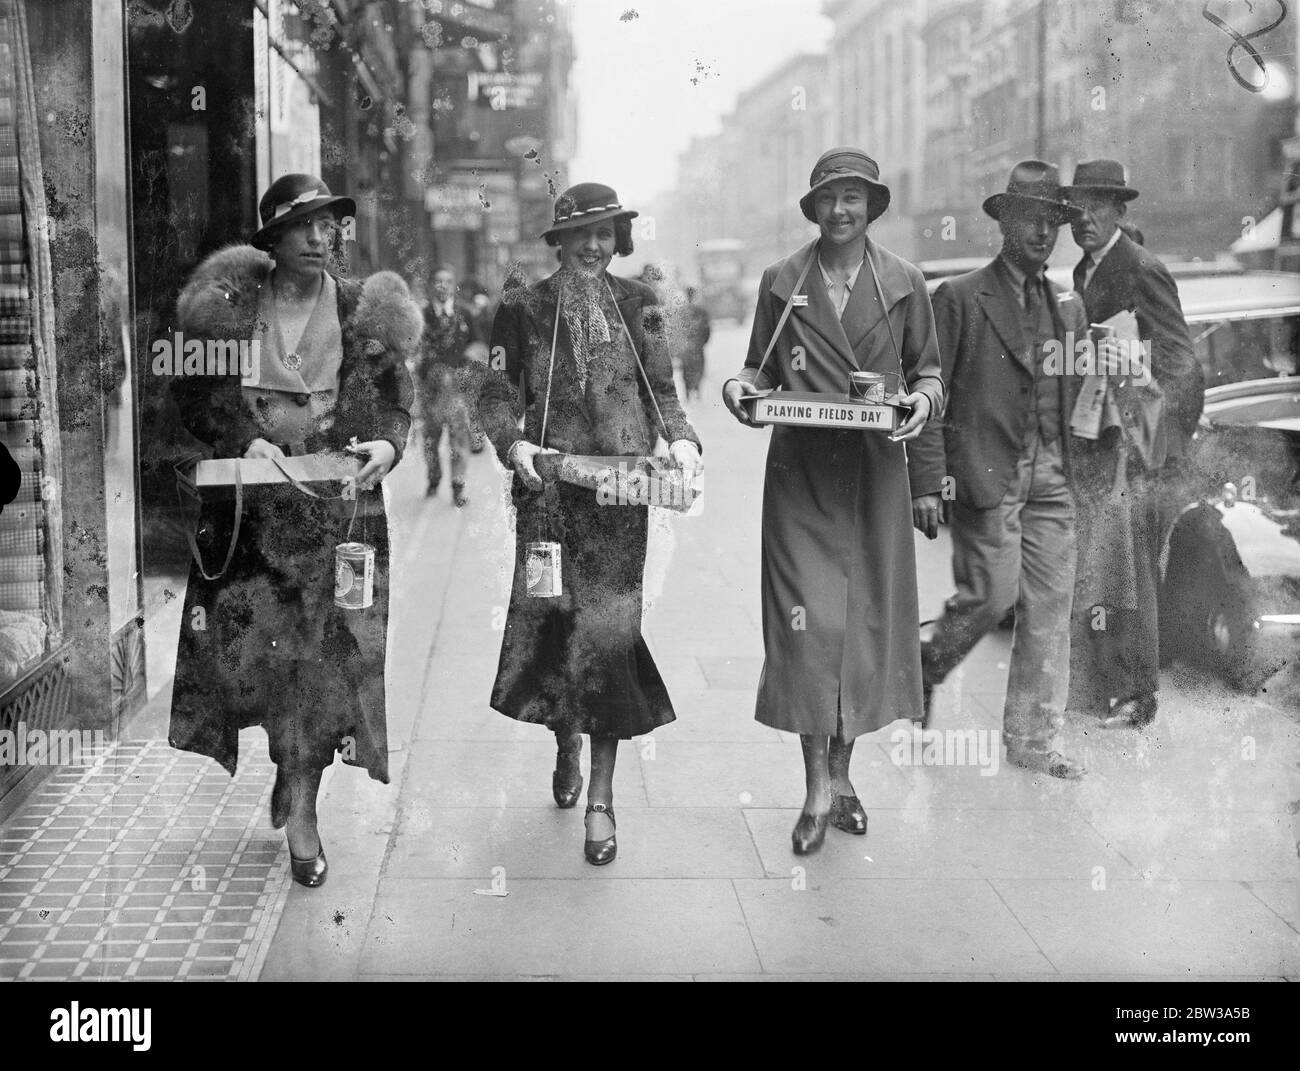 Rugby internationals ' wives collect for more playing fields . ' Playing fields day ' to raise funds for more playing fields , was celebrated throughout Greater London . Many women famous in sporting , theatrical and society circles assisted in the collection . Photo shows the wives of three international rugby captains walking in the Oxford Street with their trays , left to right , Mrs W J H Davies , wife of the former England captain , Mrs A L Gracie , wife of the former Scottish Captain and Mrs W W Wakefield , wife of another former England captain . 17 January 1934 Stock Photo